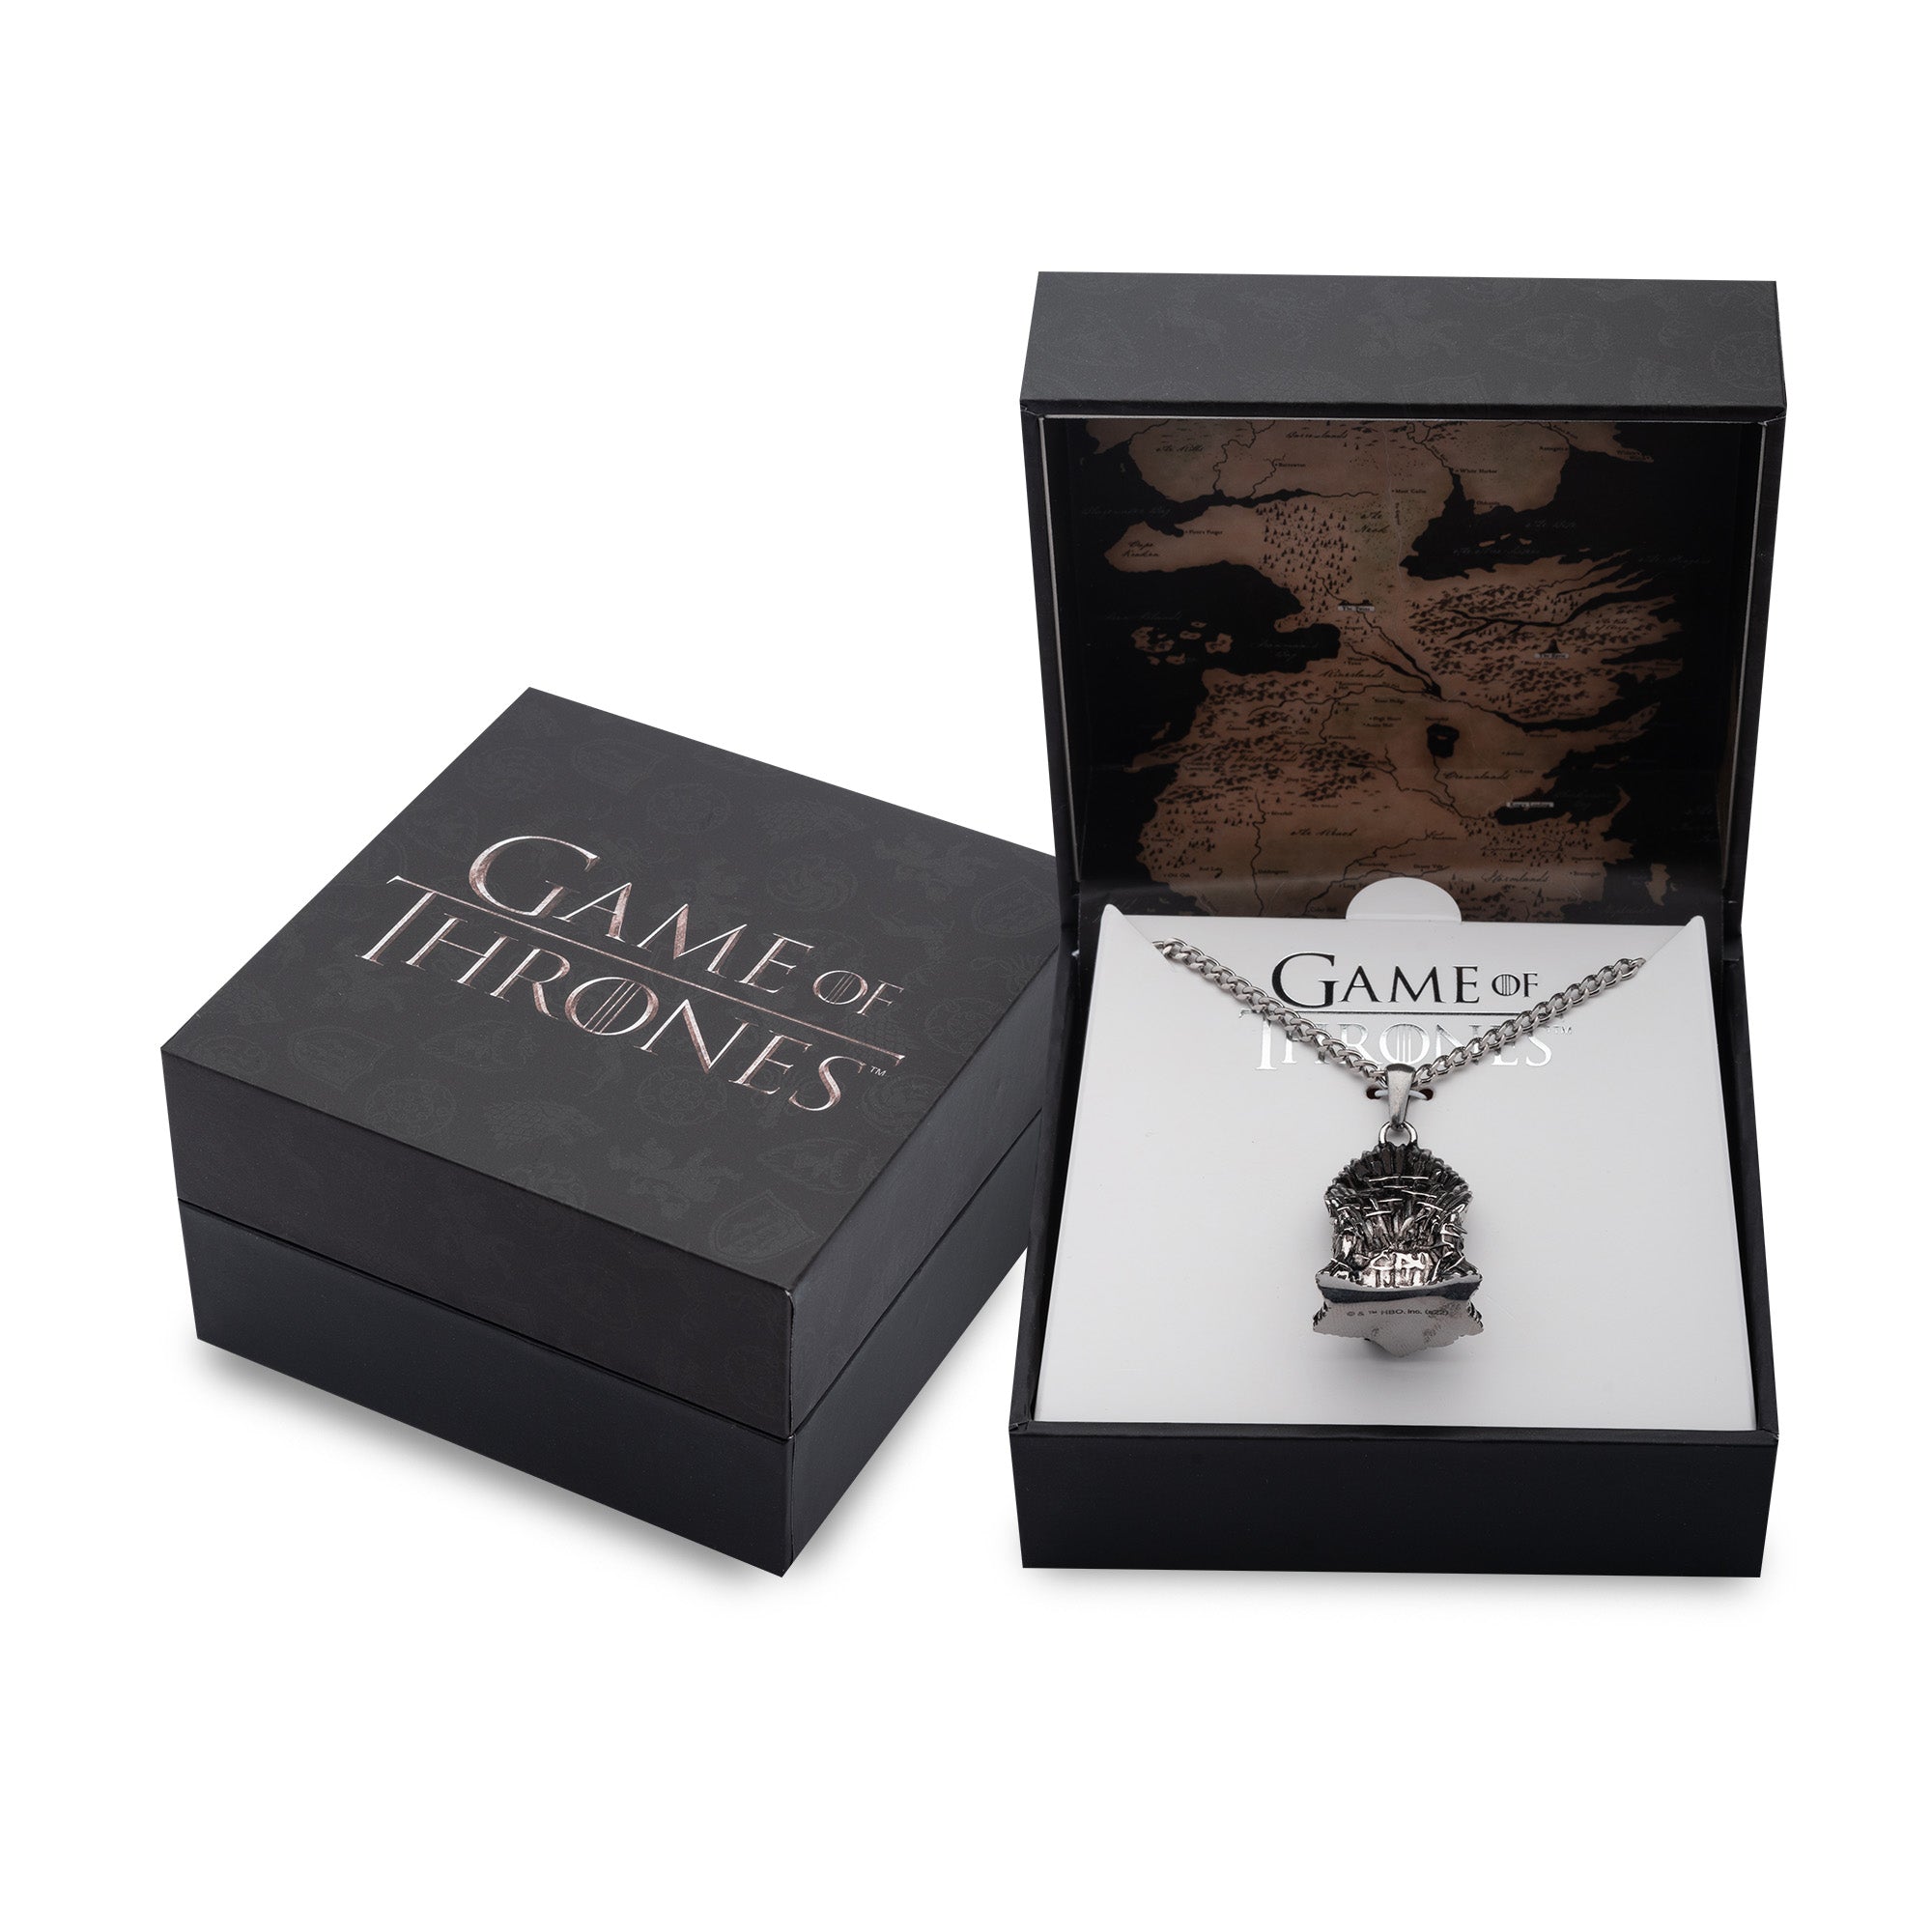 Game of Thrones Iron Throne 3D Pendant Necklace